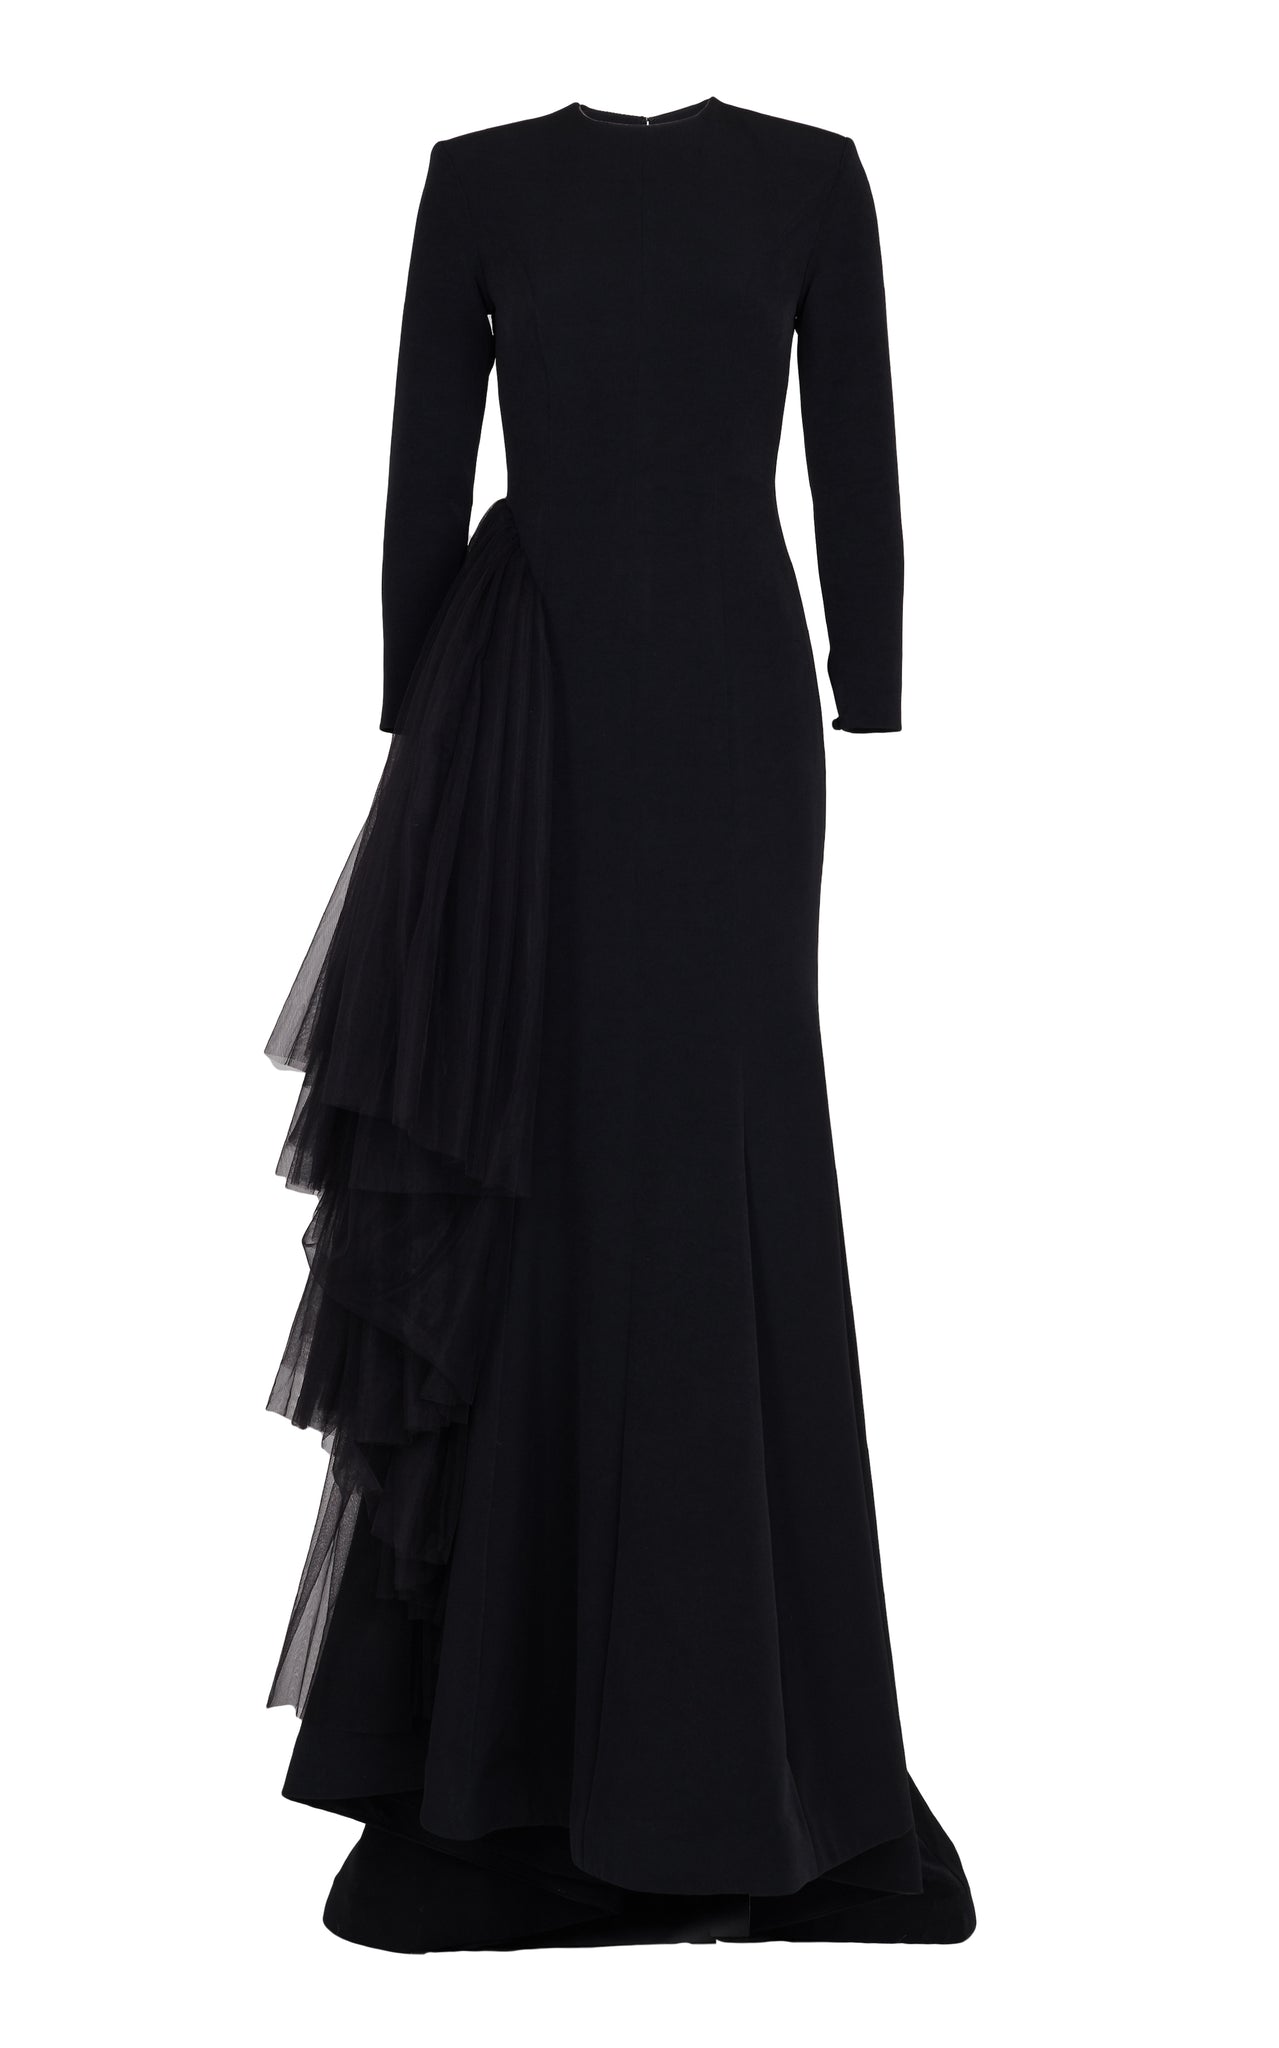 Black long sleeve gown